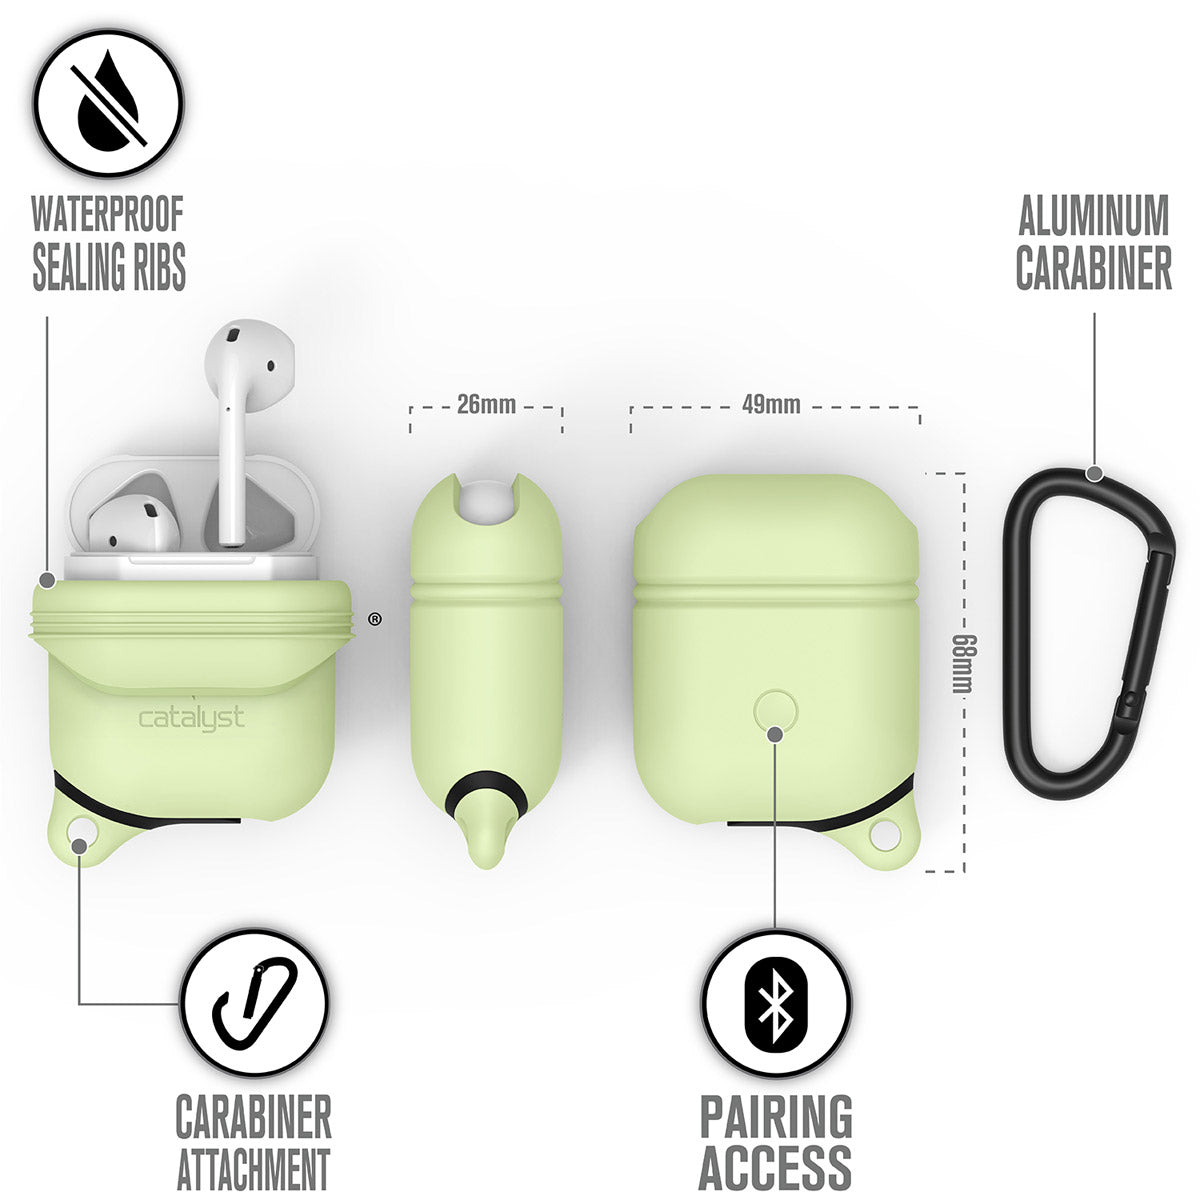 CATAPDGITD-FBA | Catalyst airpods gen2/1 waterproof case + carabiner showing the case dimension and features in glow in the dark text reads waterproof sealing ribs aluminum carabiner pairing access carabiner attachment